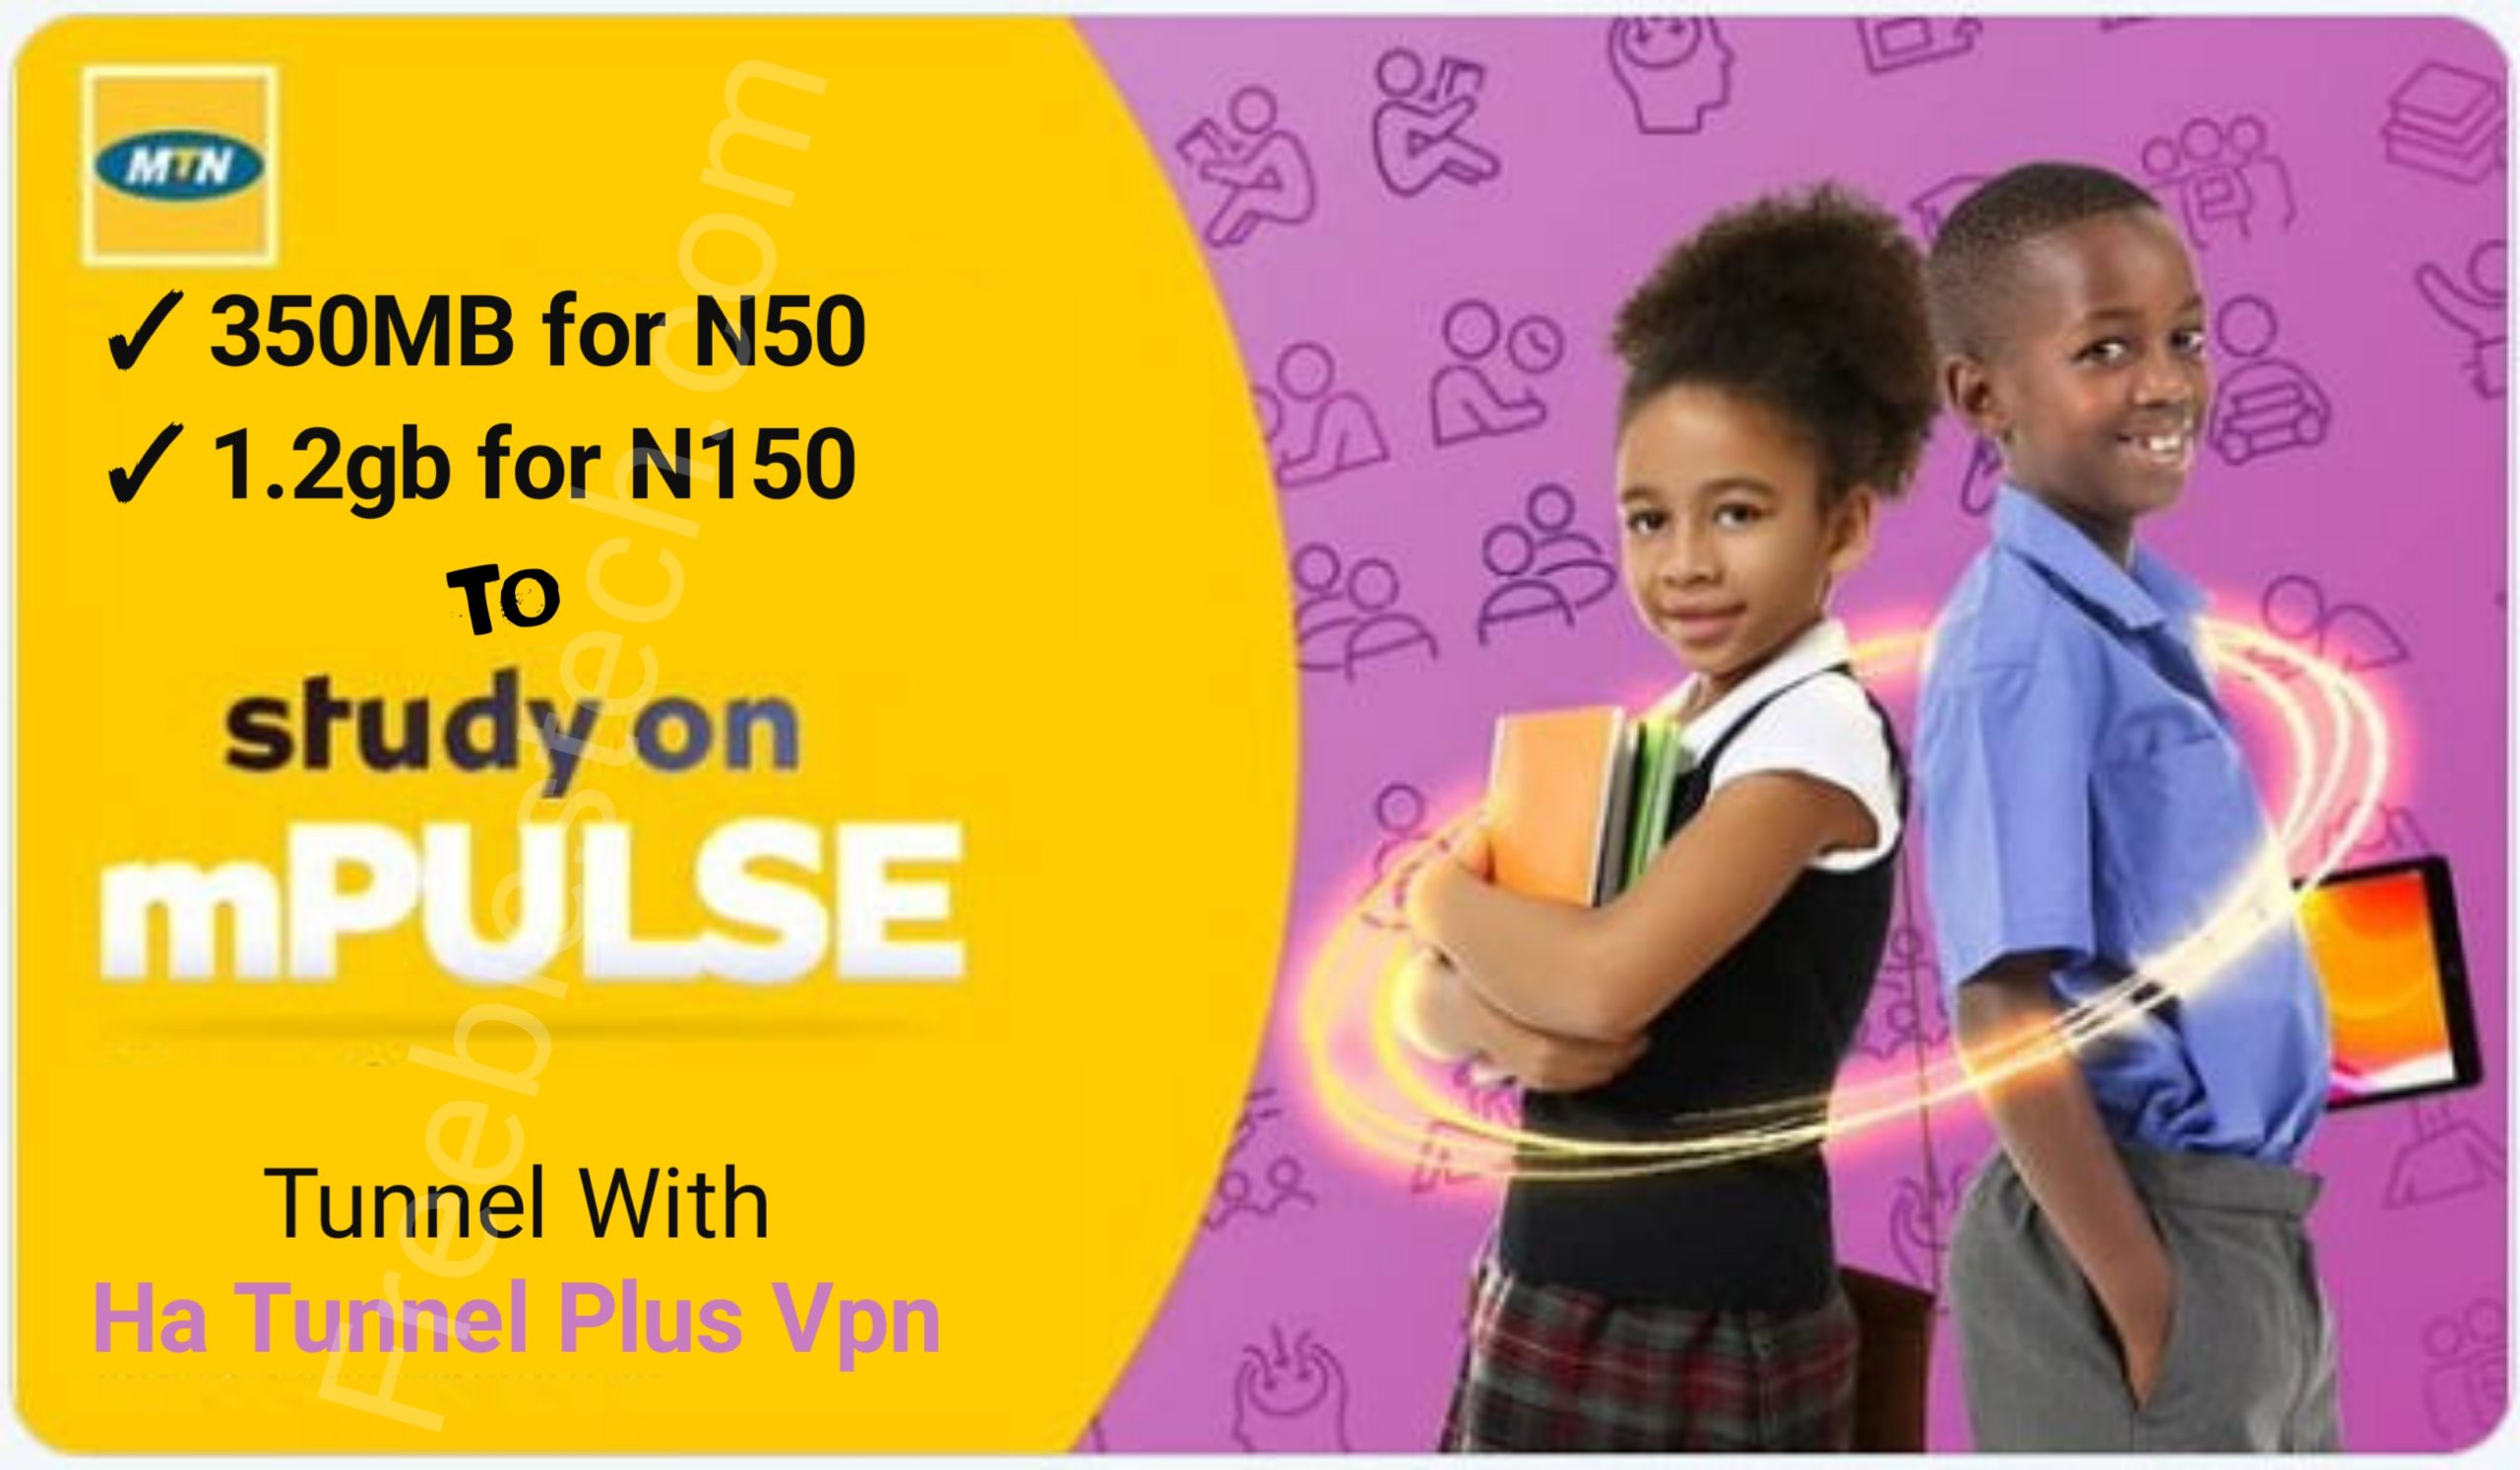 How To Activate MTN mPulse Education Data Plan Tunneled With Vpn